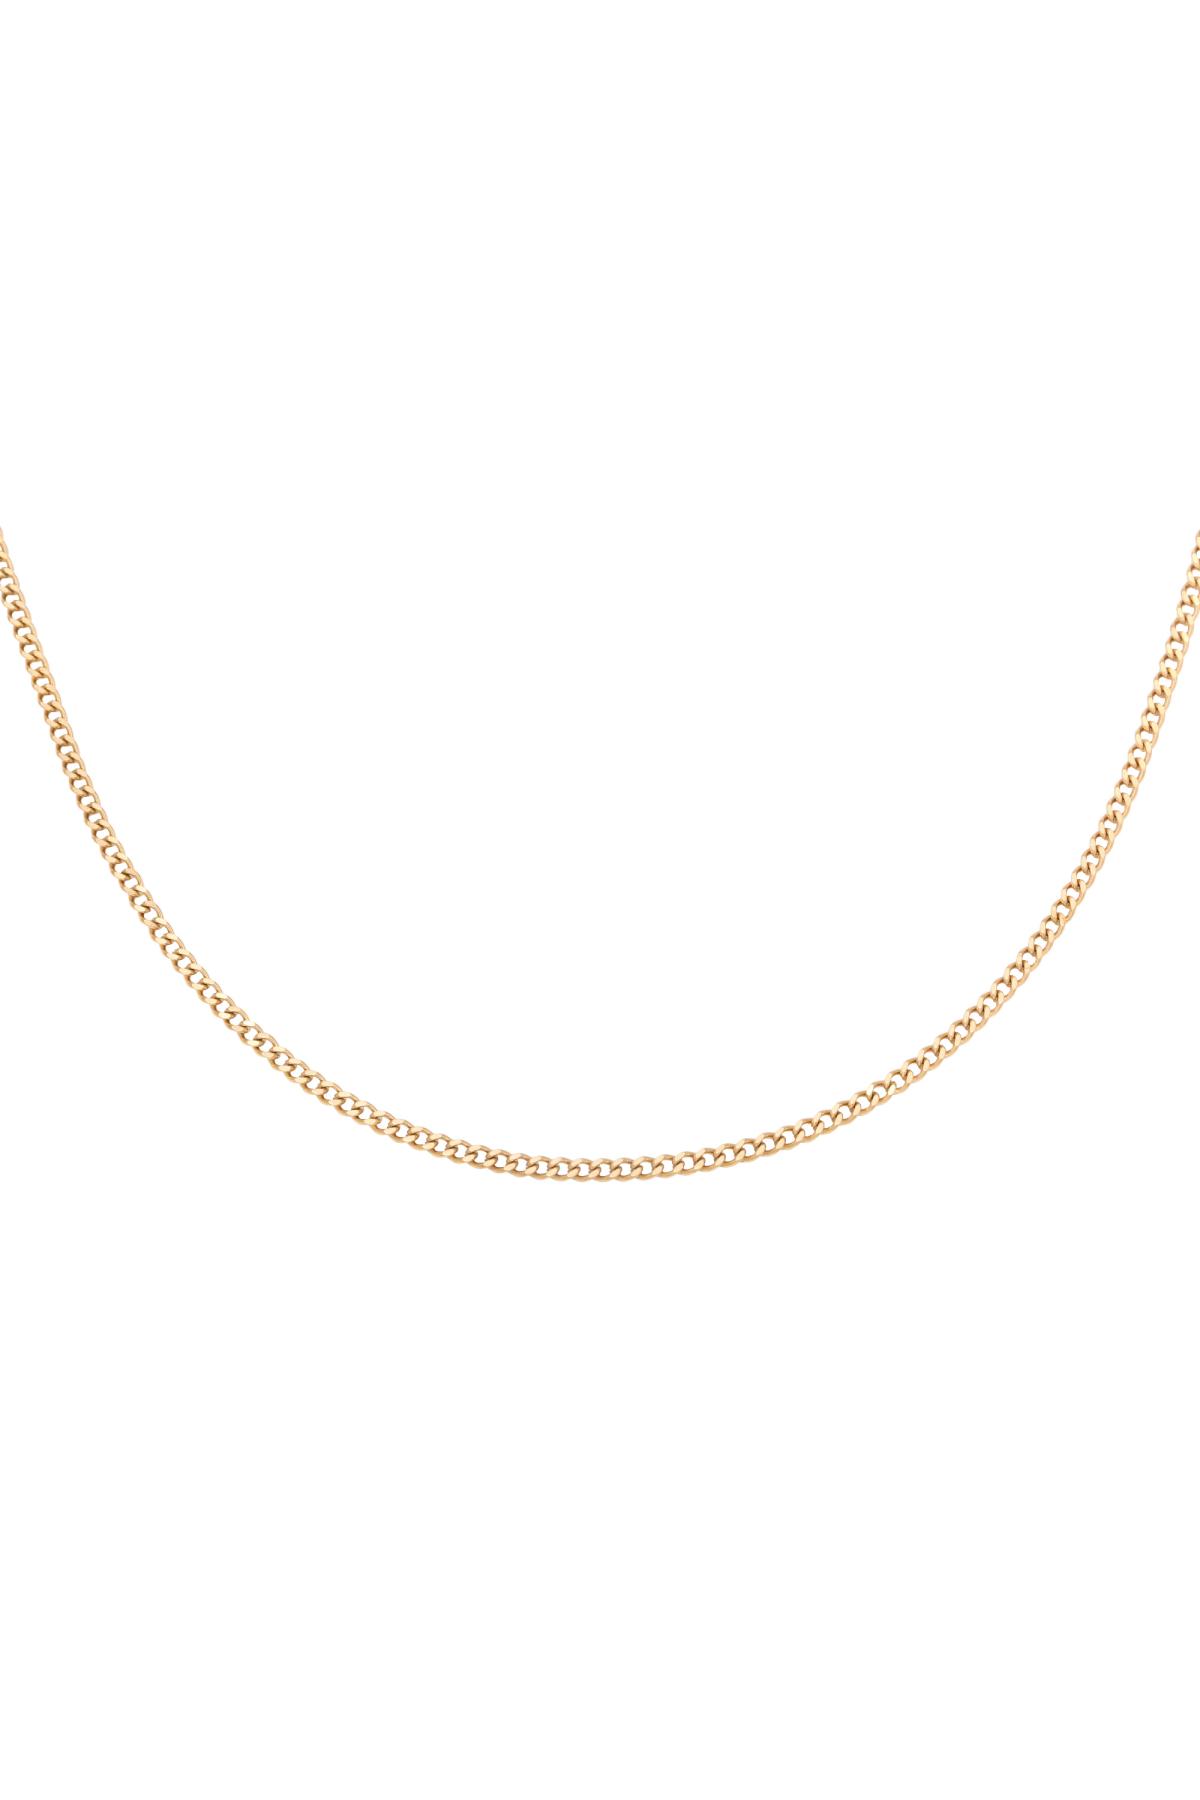 Gold / Necklace Tiny Plain Chains Gold Stainless Steel Picture2